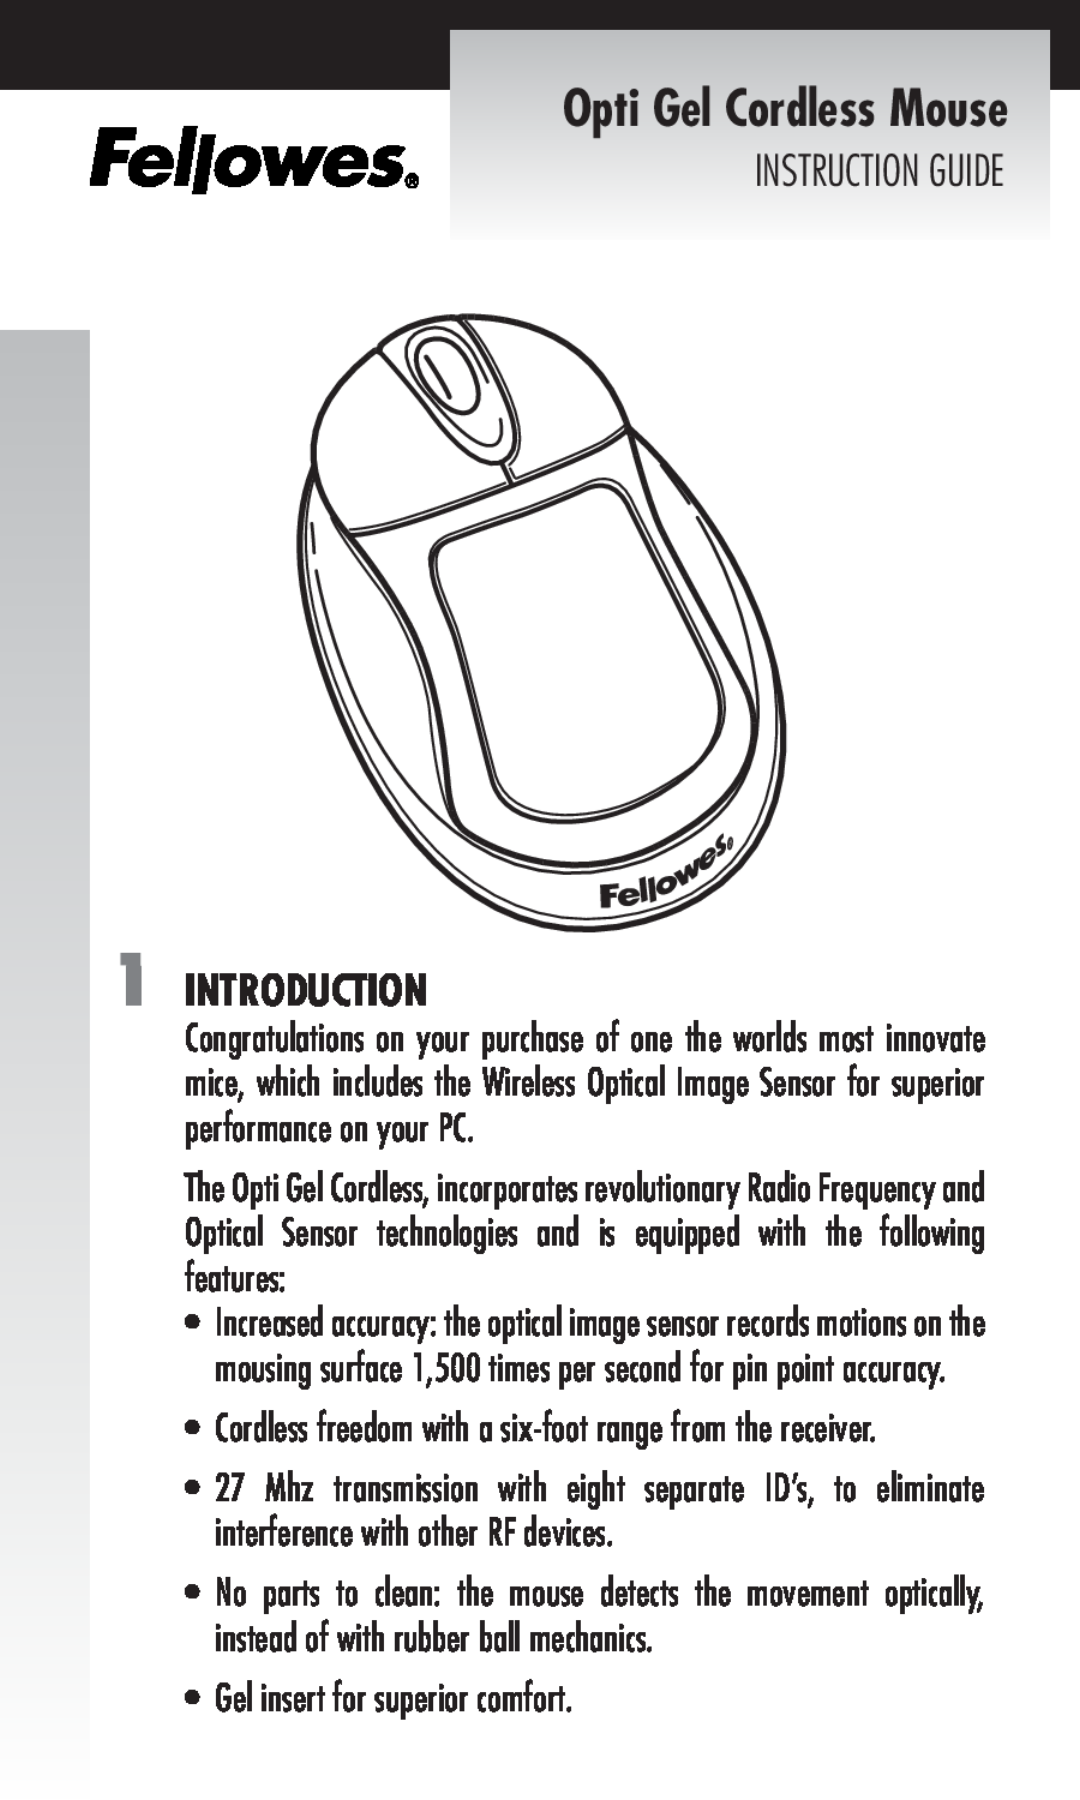 Fellowes manual Introduction, Gel insert for superior comfort, Opti Gel Cordless Mouse, Instruction Guide 